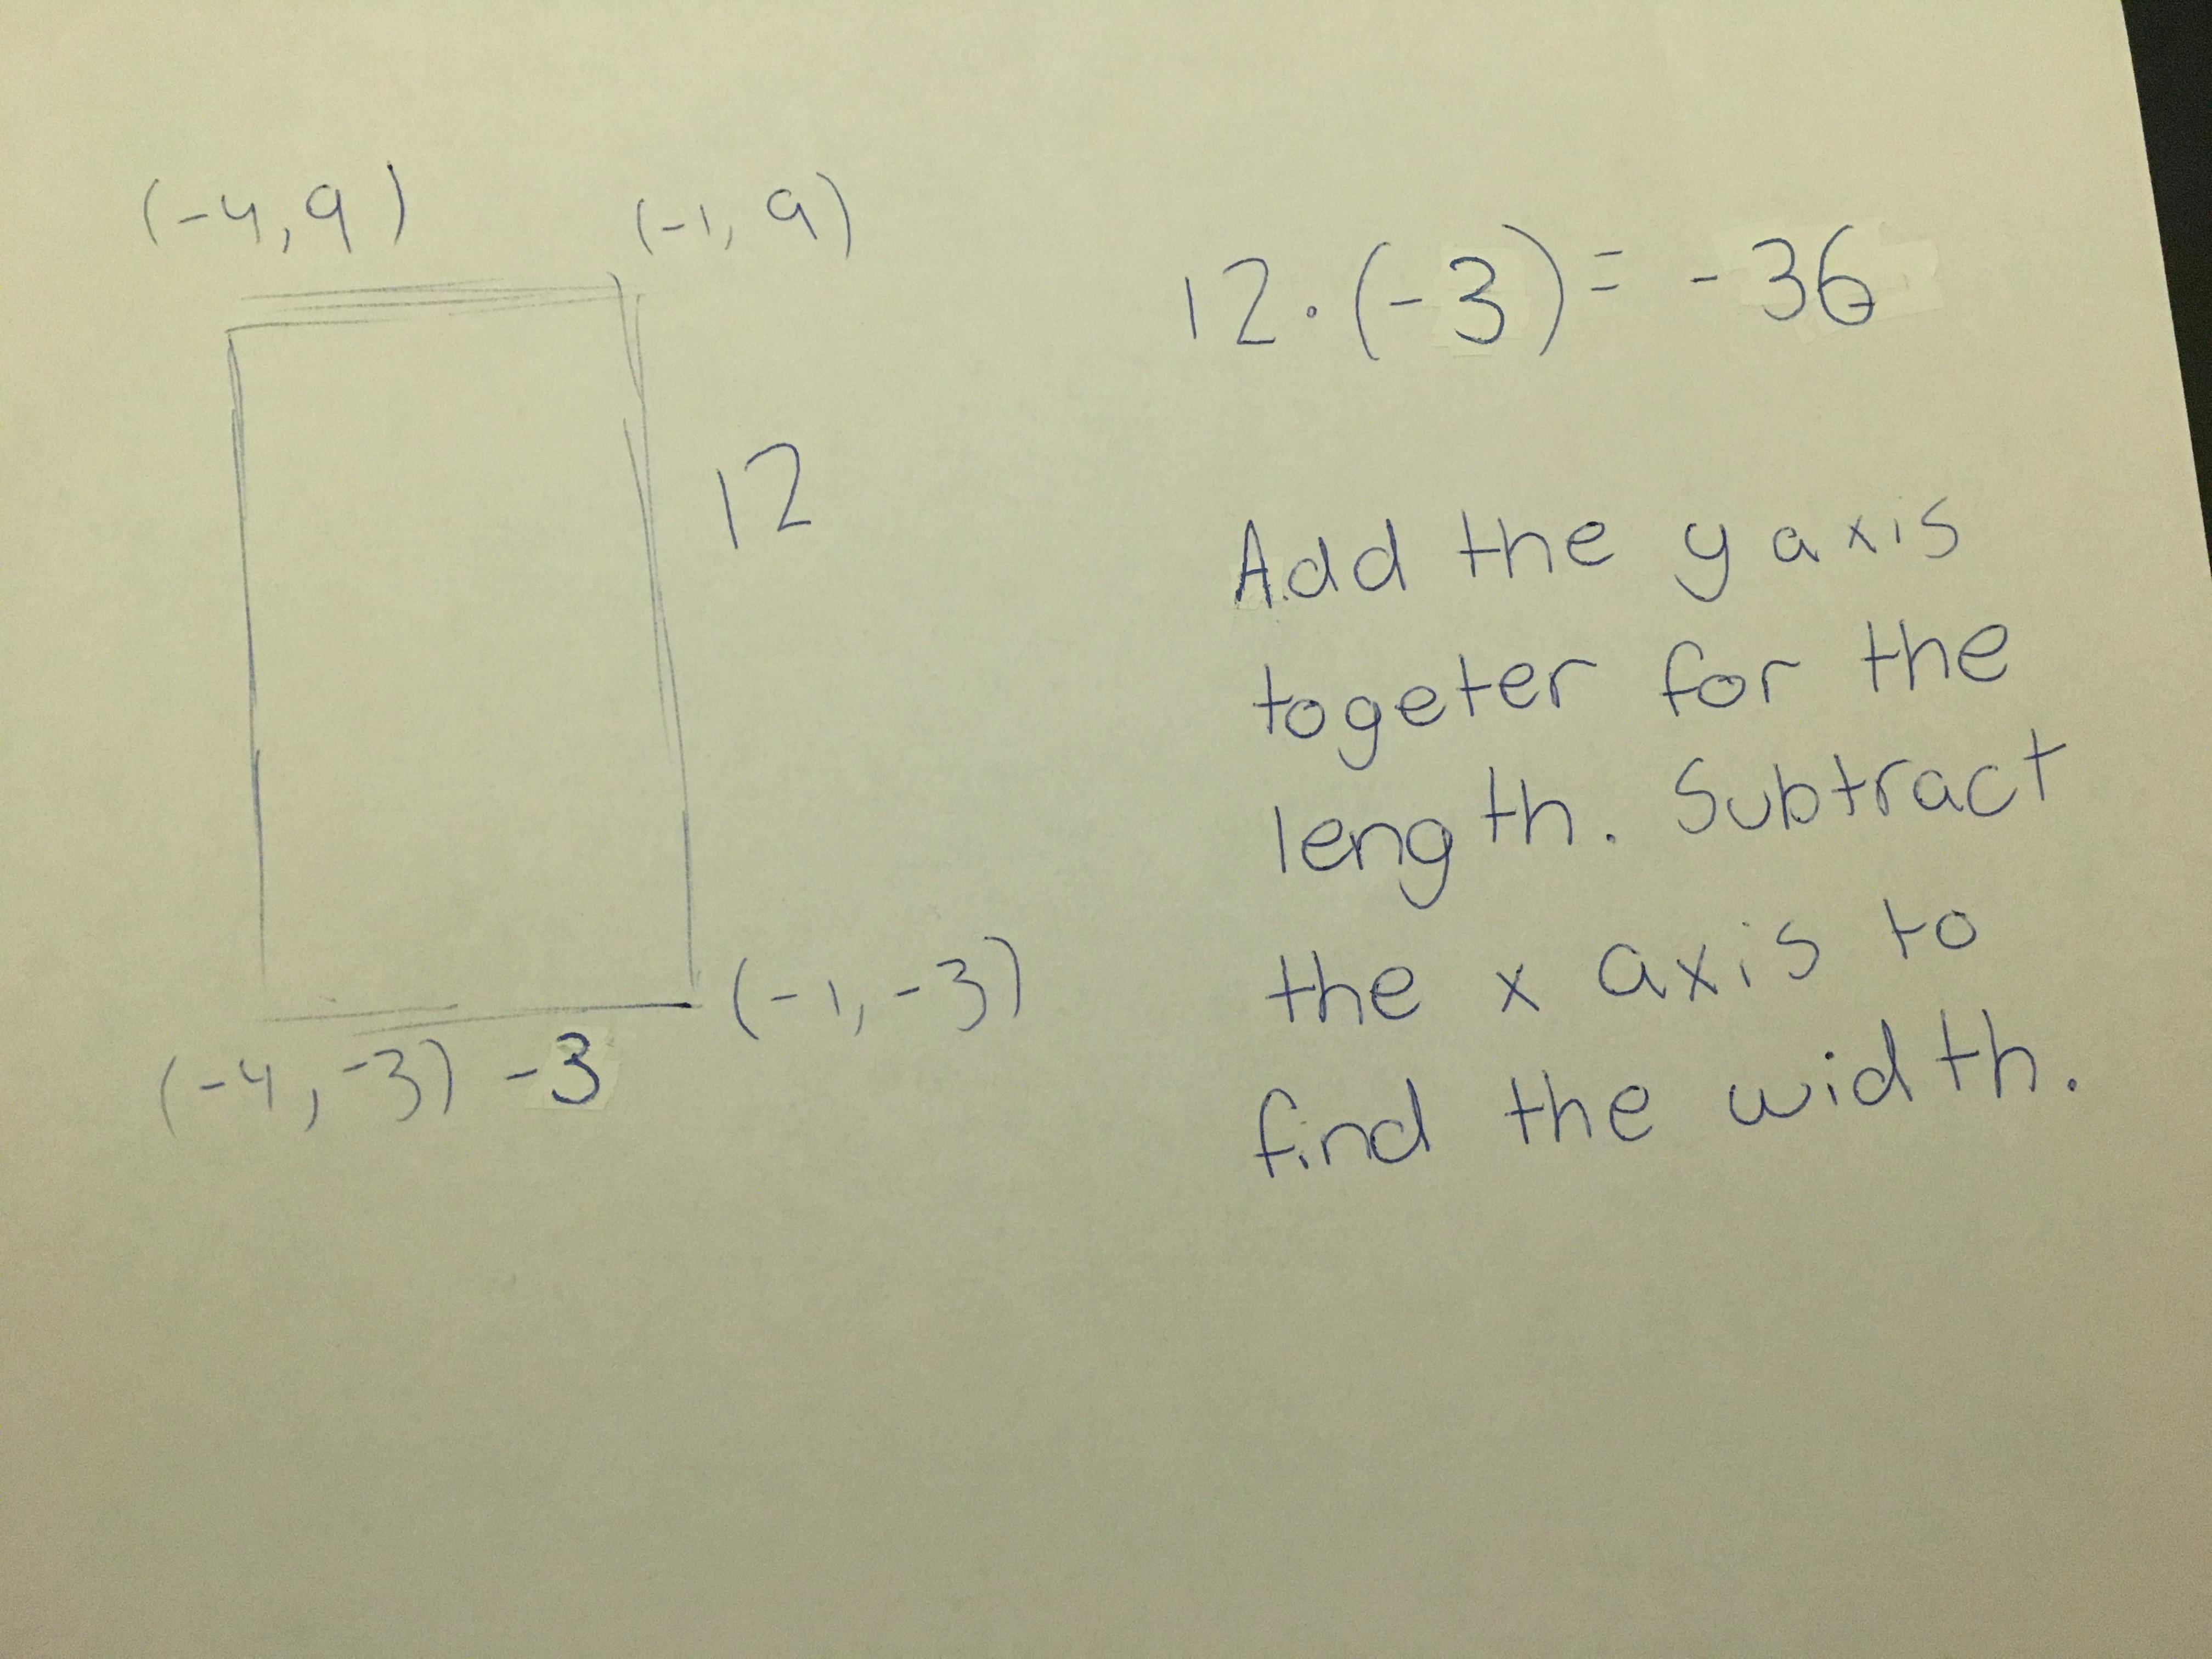 Explain How To Use A Coordinate Plane To Find The Area Of A Rectangle With Vertices (4, 9), (4, 3), (1,